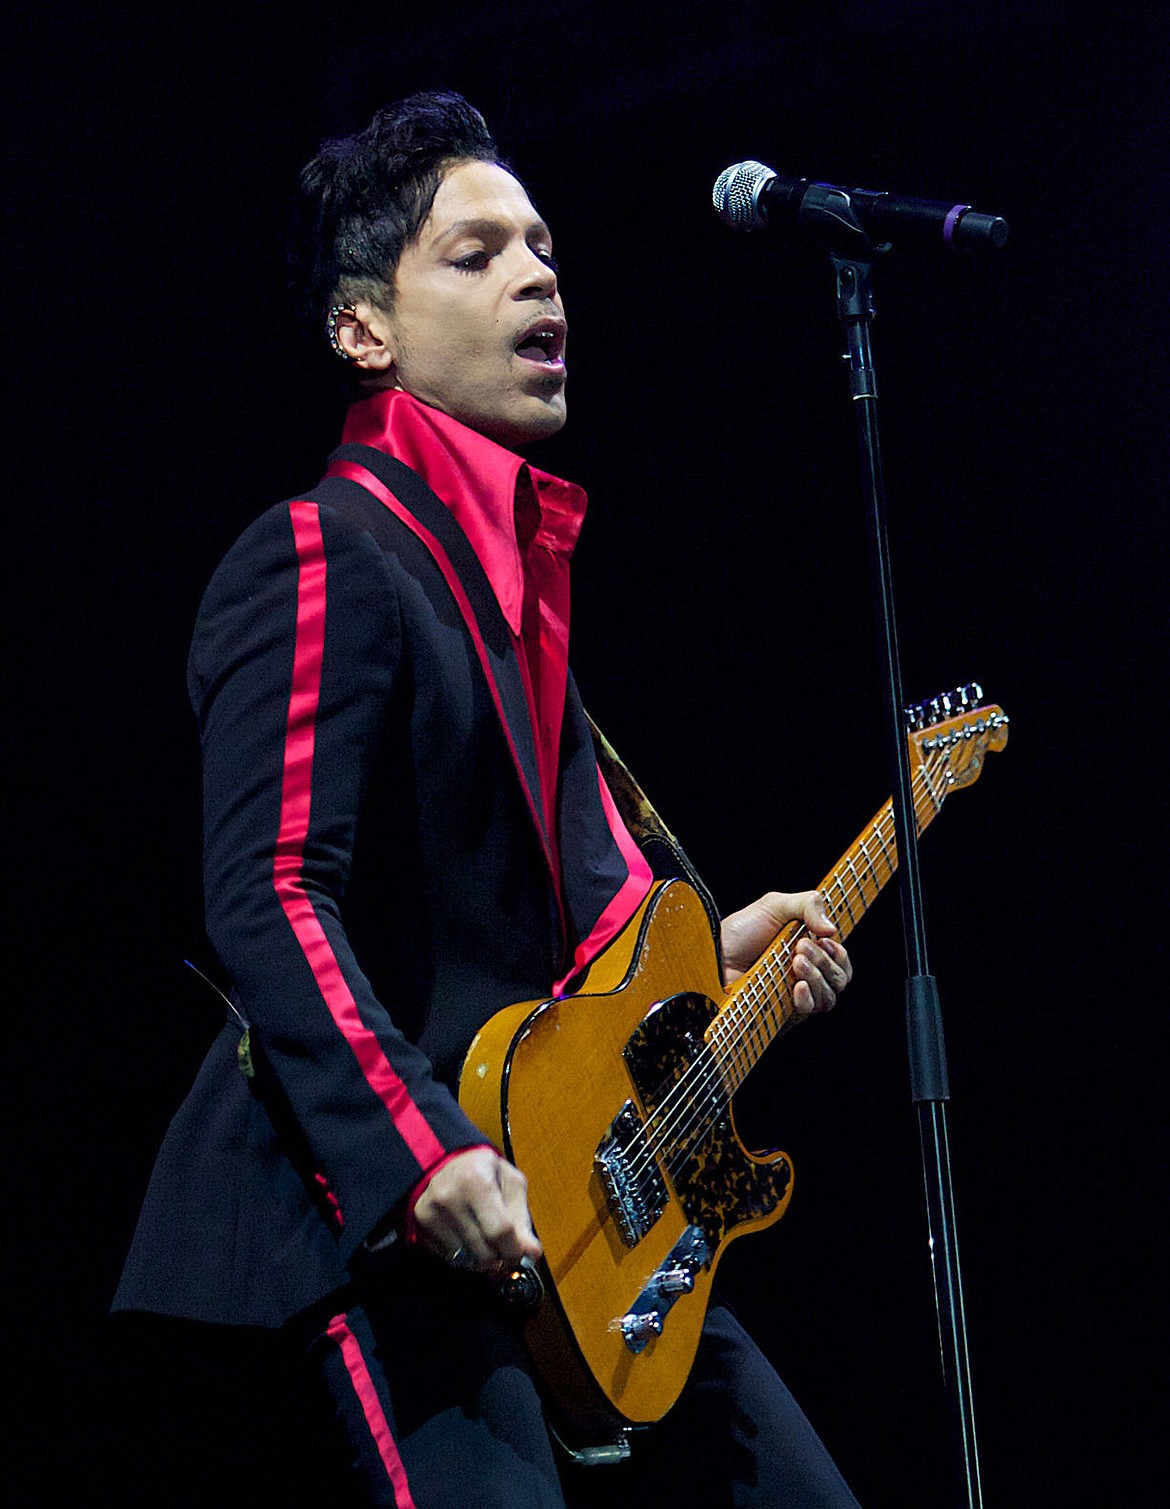 &lt;p&gt;FILE - In this Nov. 14, 2010 file photo, musician Prince performs in Yas Island, on the final night of the F1 motor race meeting in Abu Dhabi, United Arab Emirates. Prince's publicist has confirmed that Prince died at his his home, Thursday, April 21, 2016. He was 57. (AP Photo/Nousha Salimi, File)&lt;/p&gt;